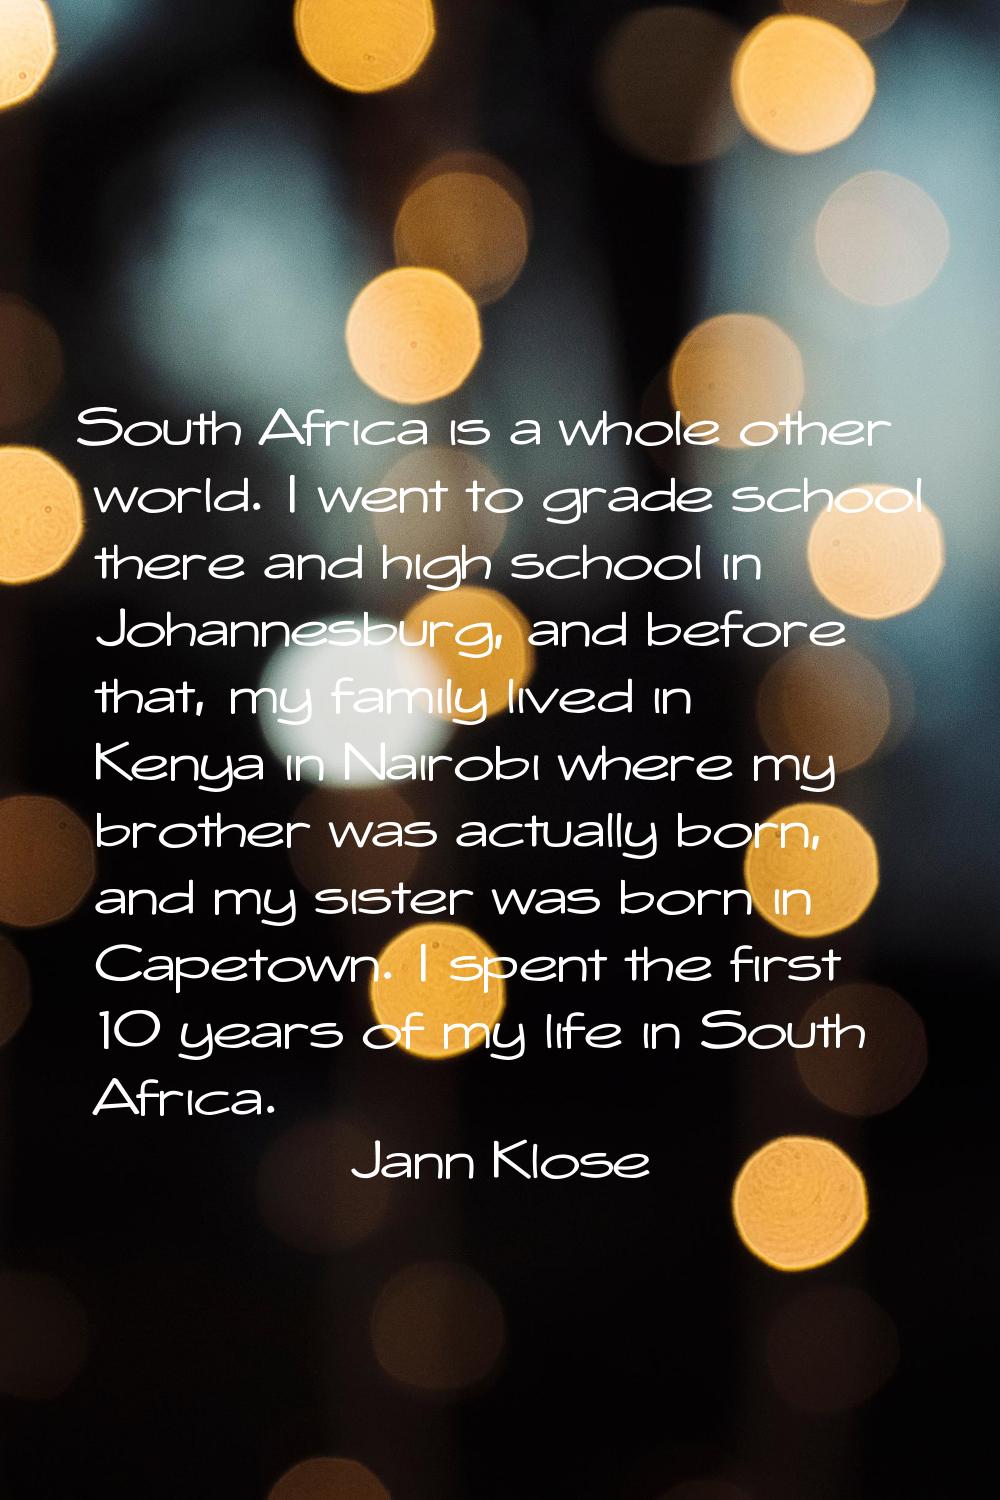 South Africa is a whole other world. I went to grade school there and high school in Johannesburg, 